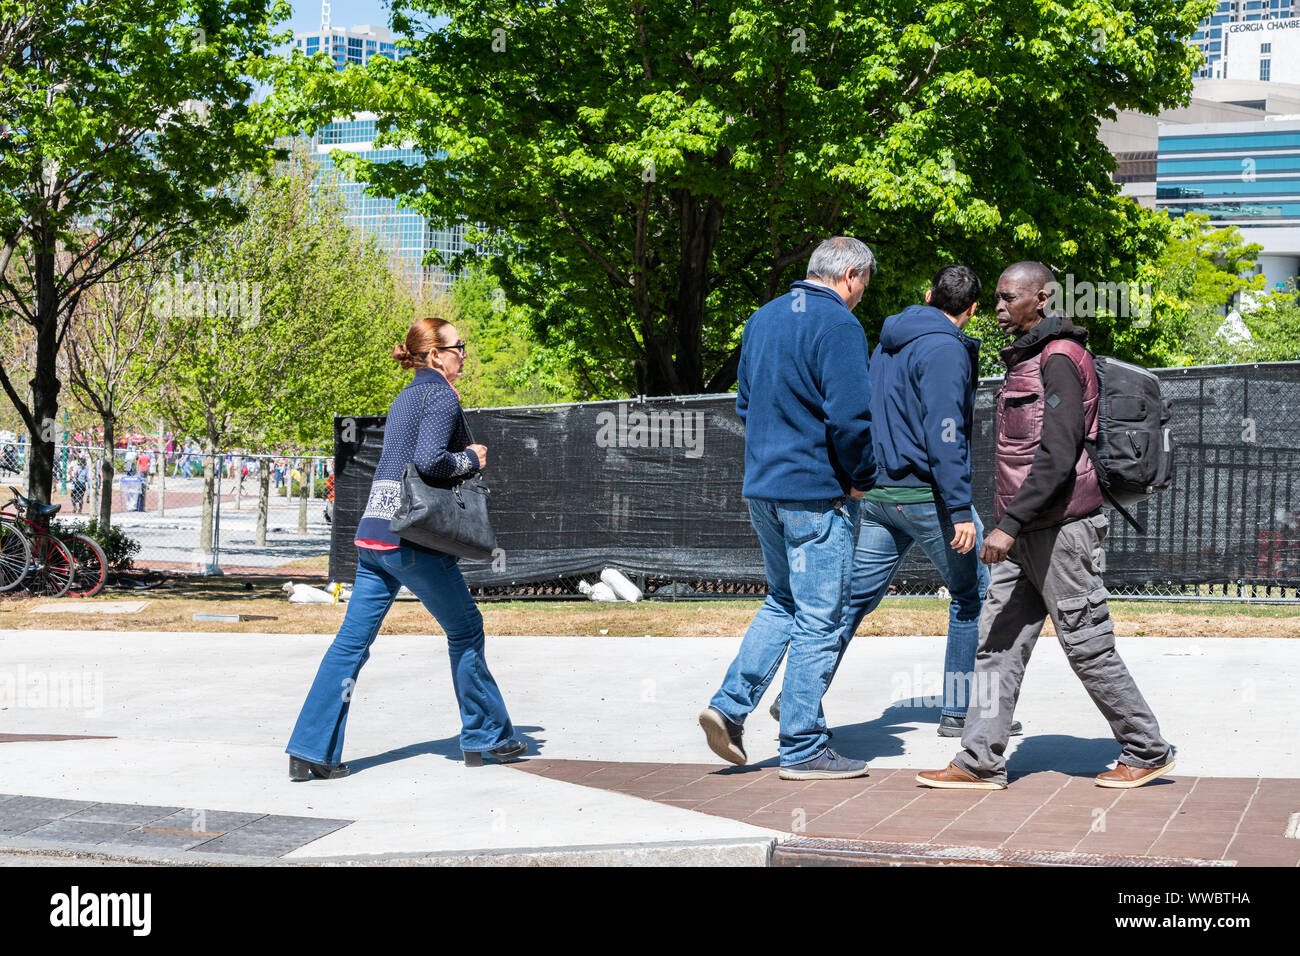 Atlanta, USA - April 20, 2018: People walking on street road sidewalk by Centennial Olympic park with office buildings skyscrapers in background in Ge Stock Photo